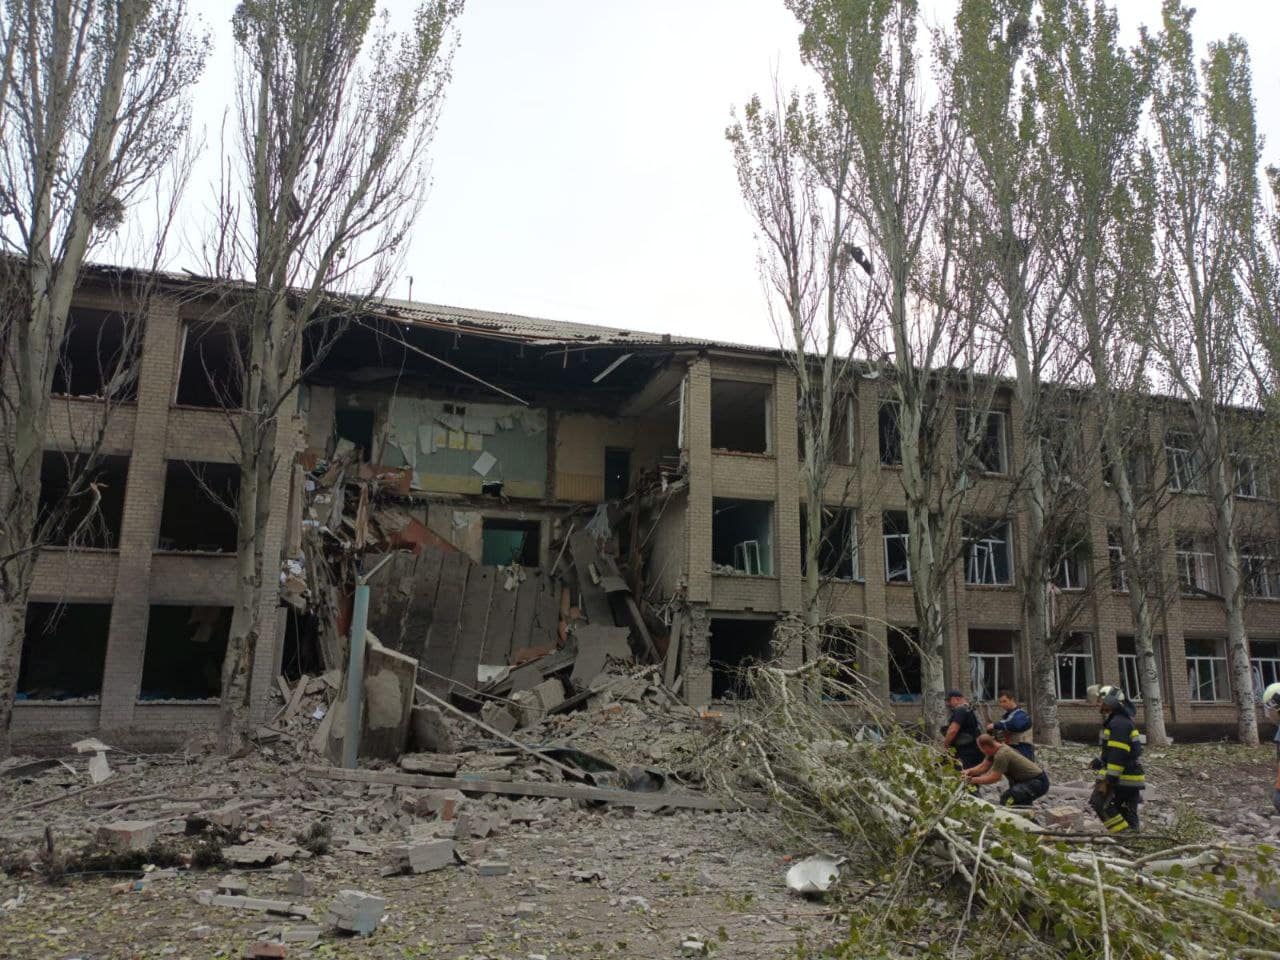 Russian troops shelled a school with a shelter for civilians in the east